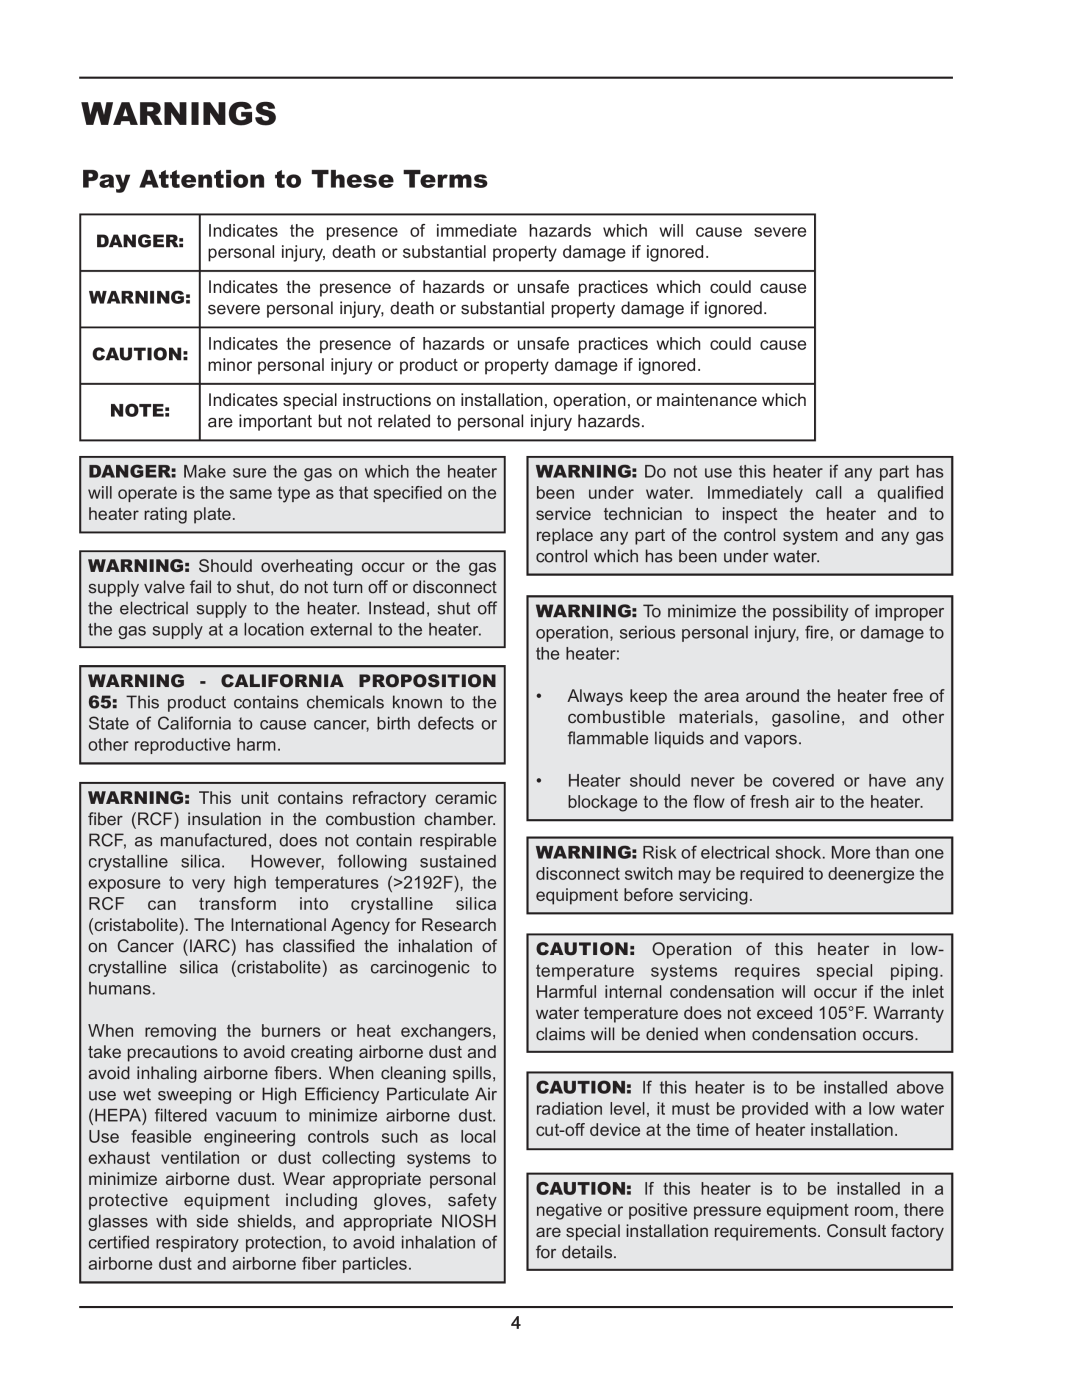 Raypak 399B-2339B operating instructions Warnings, Pay Attention to These Terms 